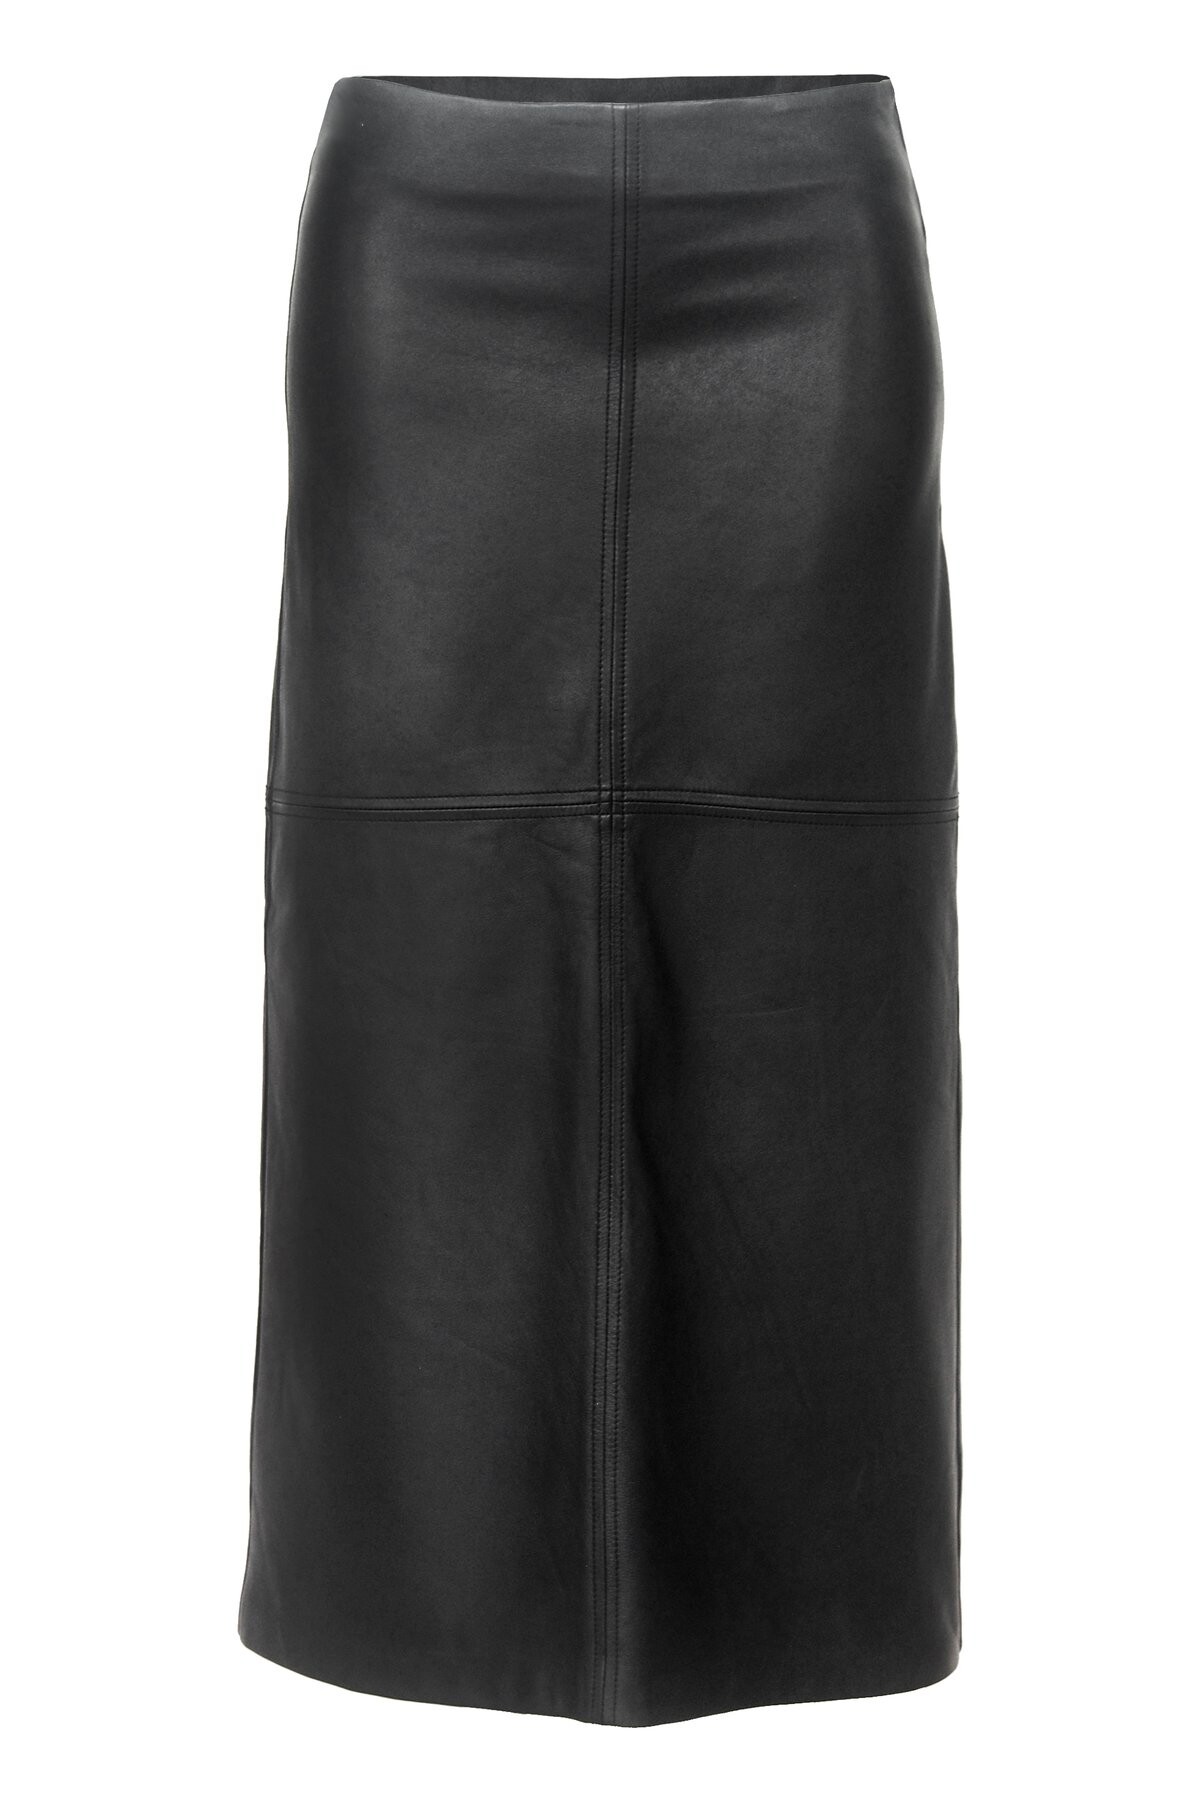 SIENNA LEATHER MAXI SKIRT (BLACK)- 2NDSKIN WINTER 21 Boxing Day Sale